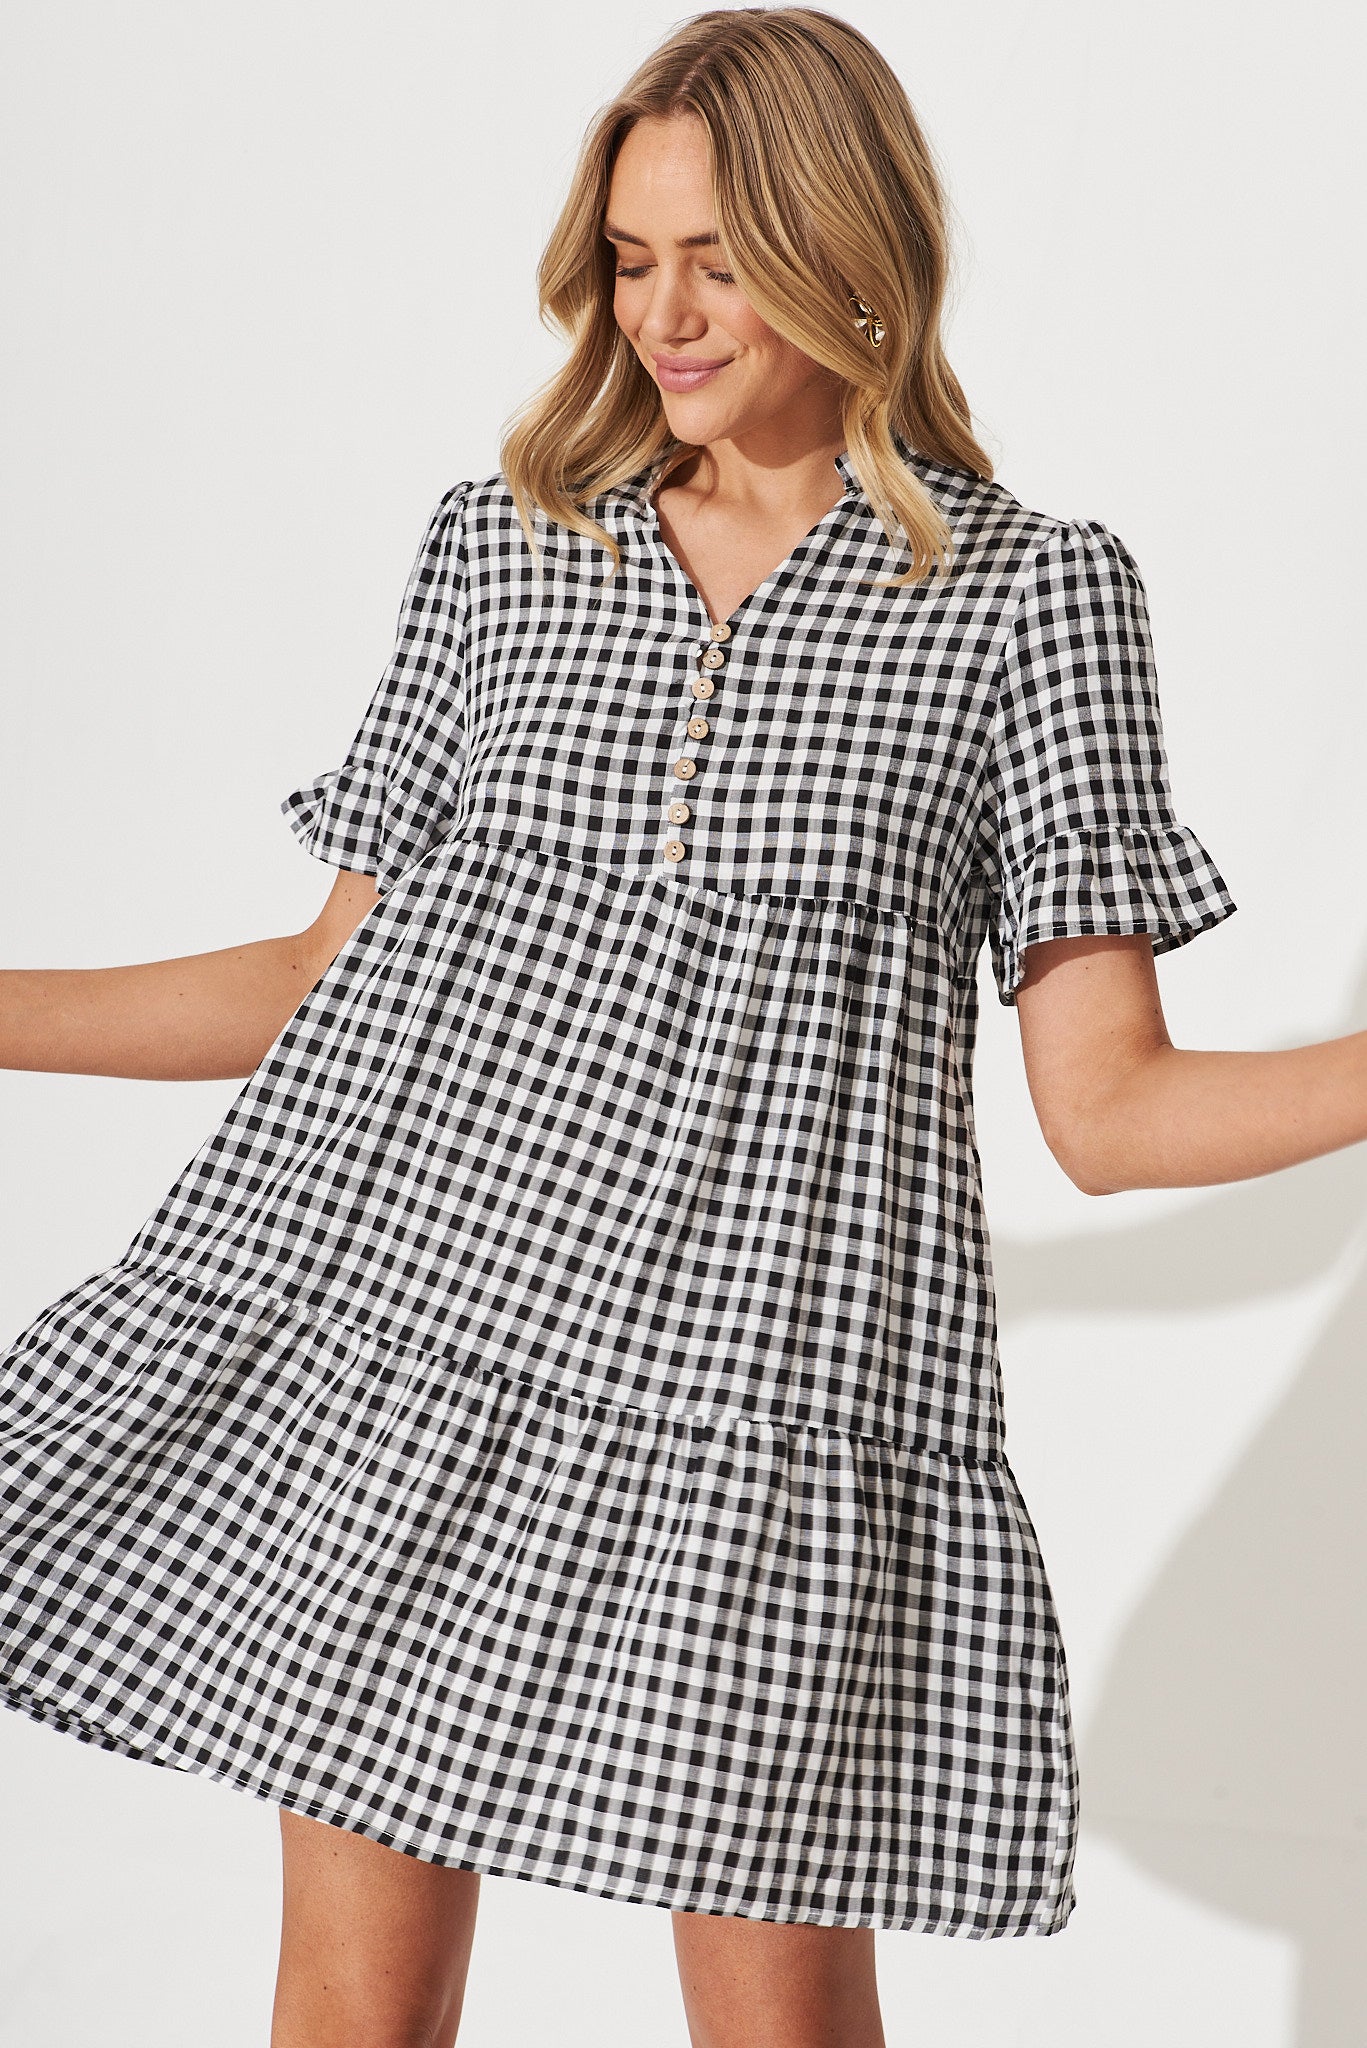 Danna Smock Dress In Black And White Gingham Cotton Blend - front